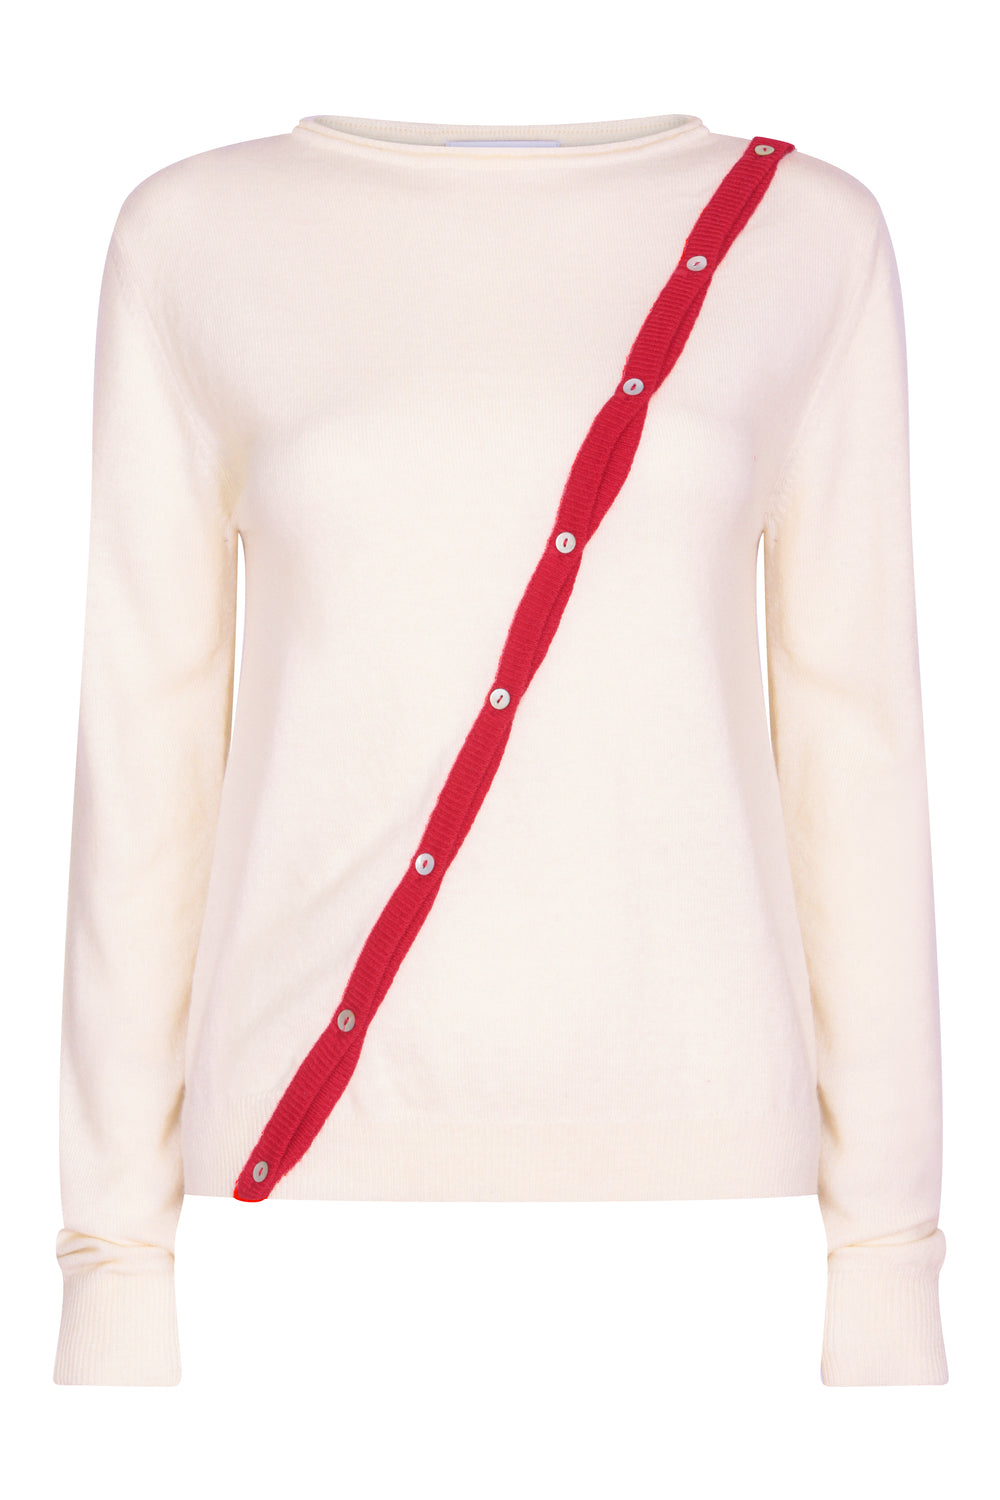 cream cashmere cardigan with diagonal buttoning in red